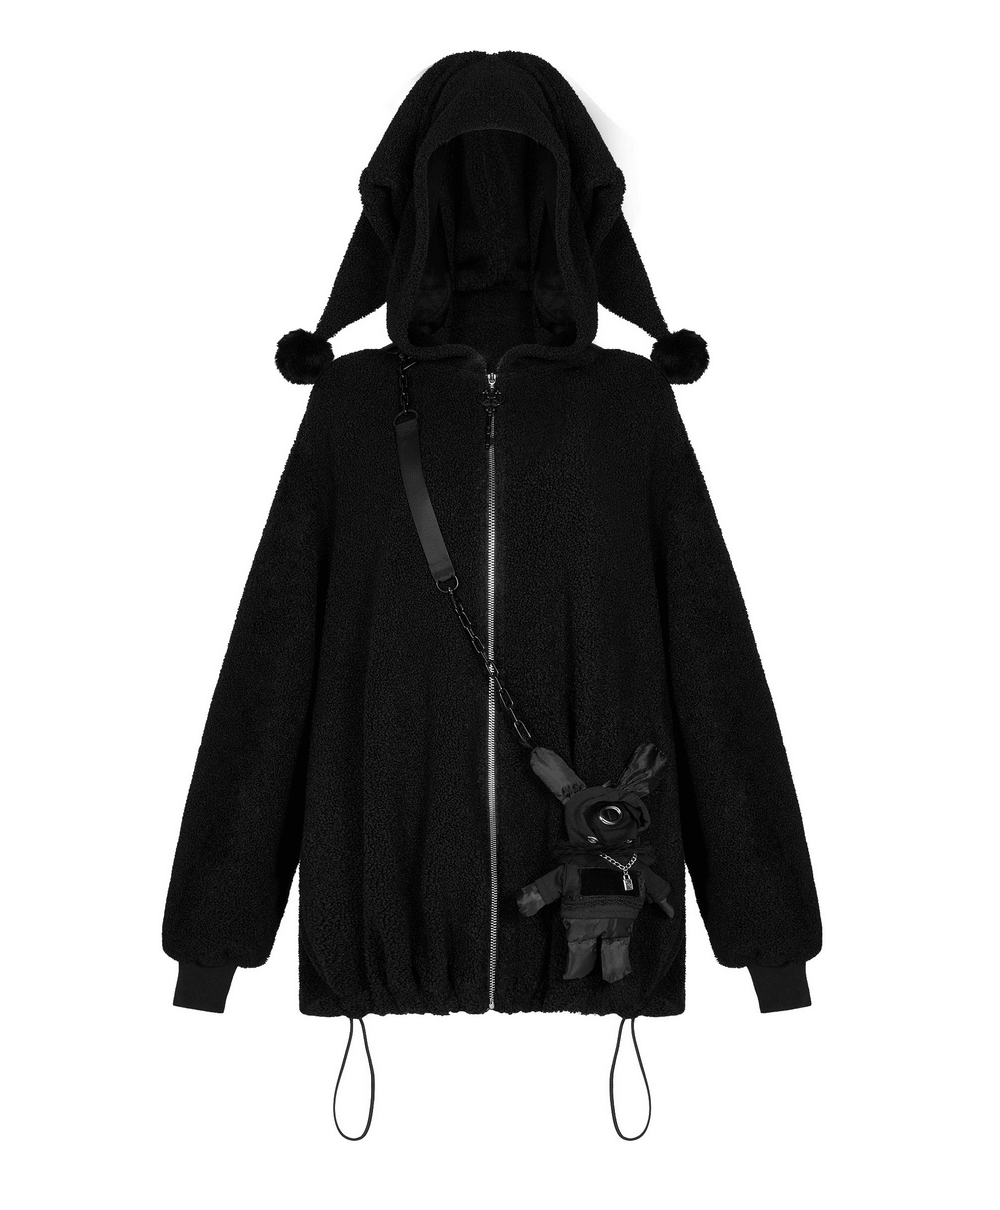 Trendy Black Hooded Jacket with Bunny Plush Purse